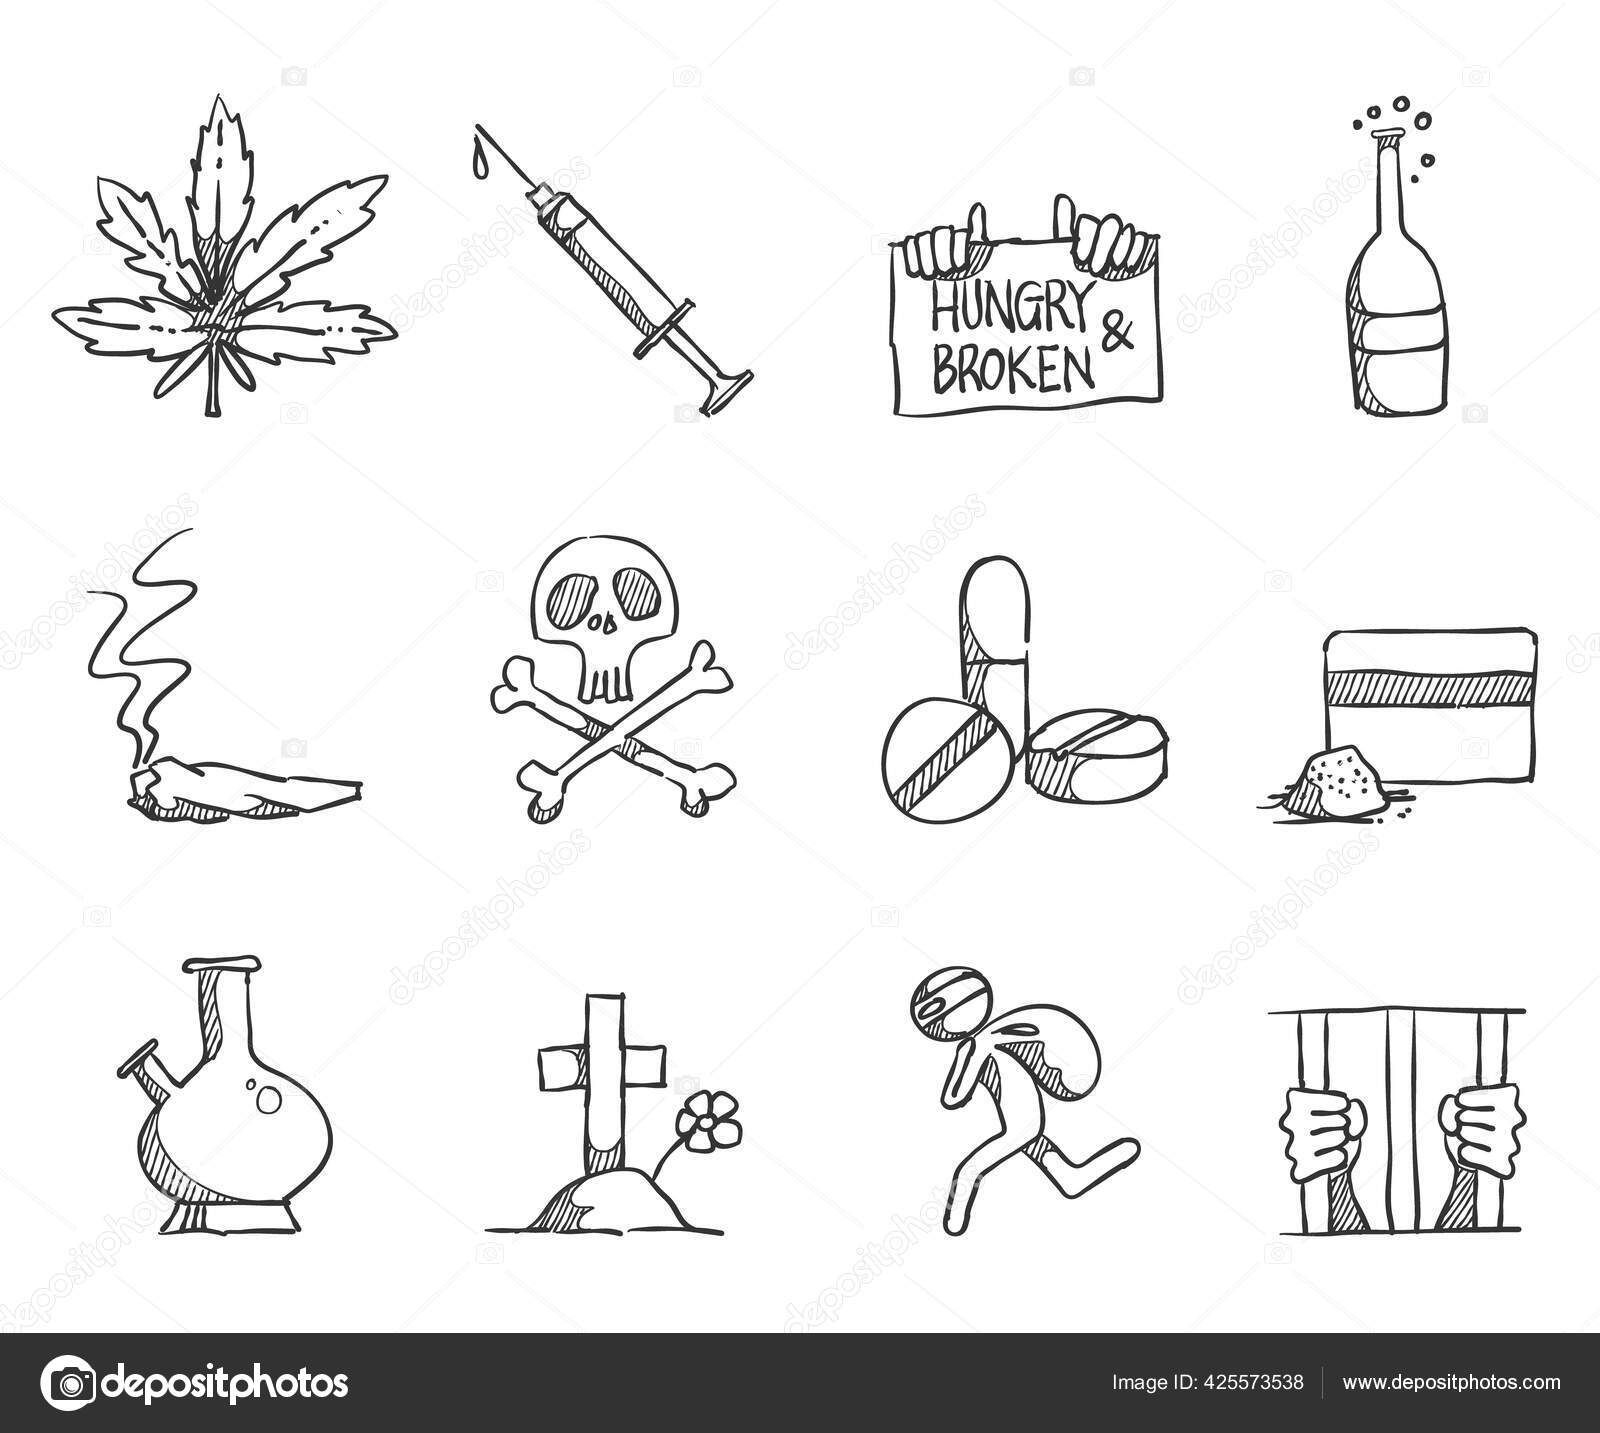 No Drugs Sketch Stock Vector (Royalty Free) 497943112 | Shutterstock